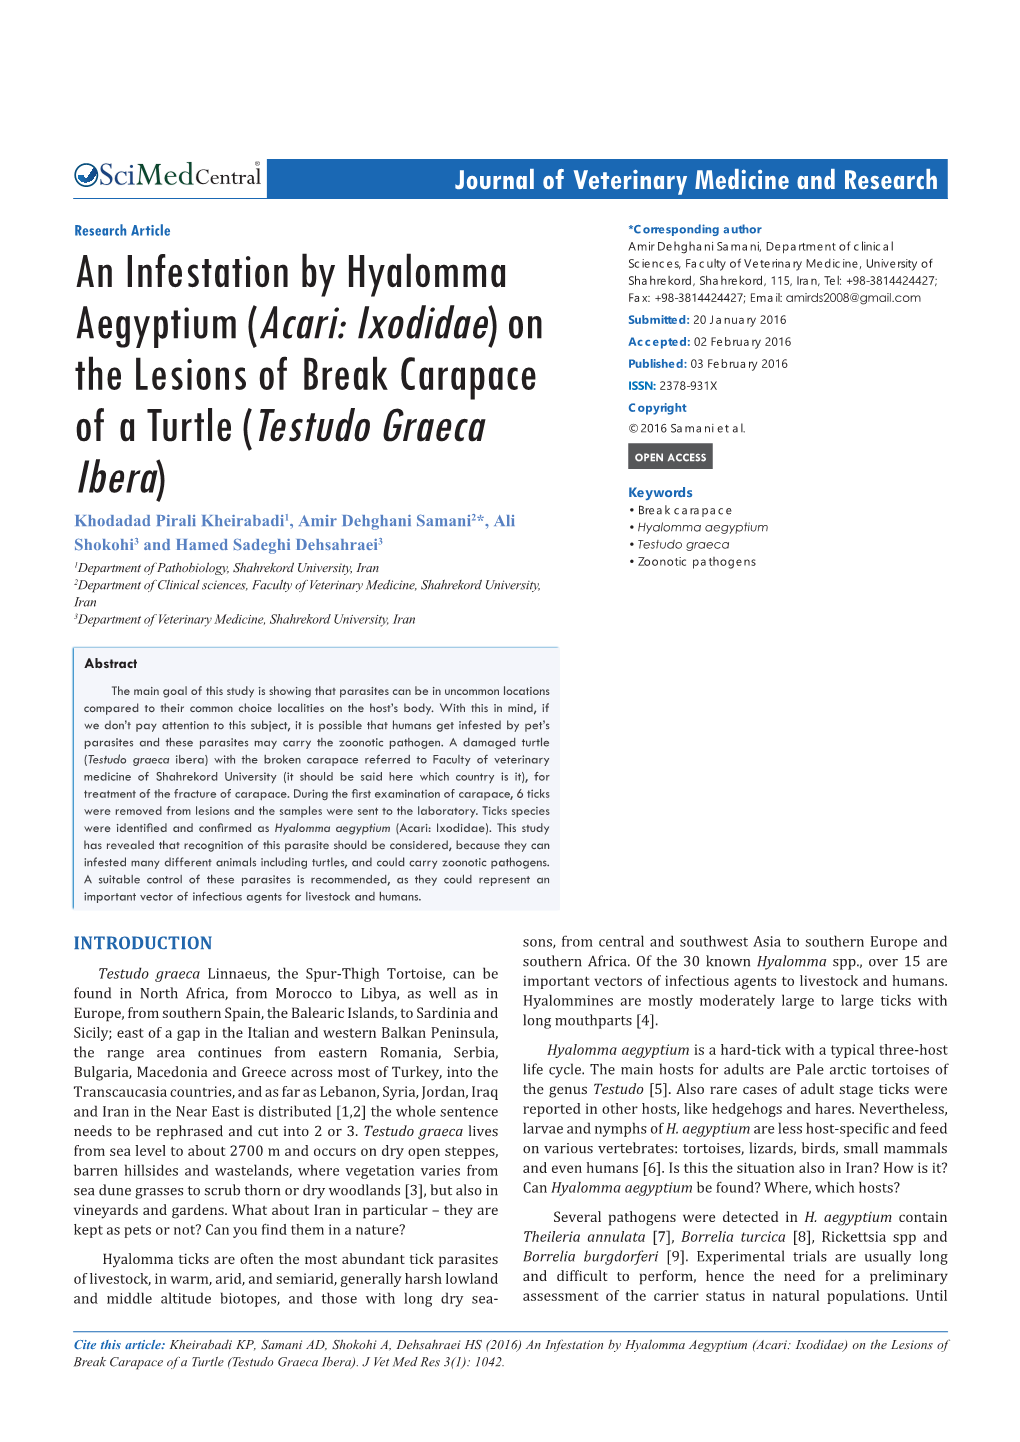 An Infestation by Hyalomma Aegyptium (Acari: Ixodidae) on the Lesions of Break Carapace of a Turtle (Testudo Graeca Ibera)